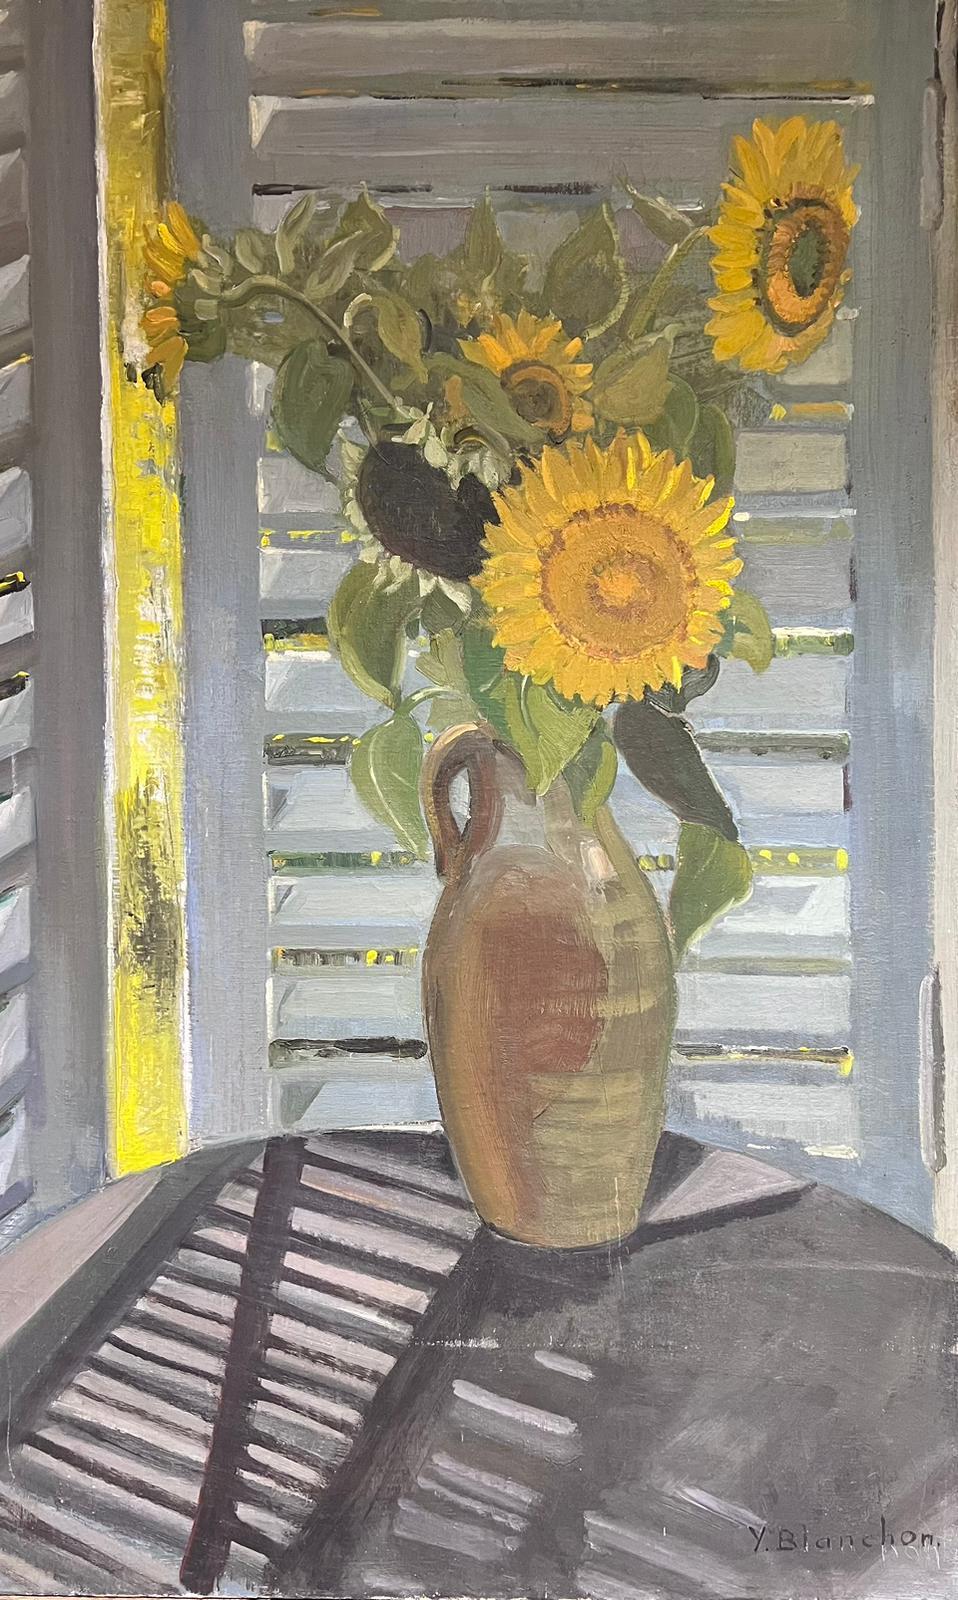 French School, 1930's Interior Painting - Huge 1930's French Signed Oil Sunflowers in Vase in Interior Windowsill Scene